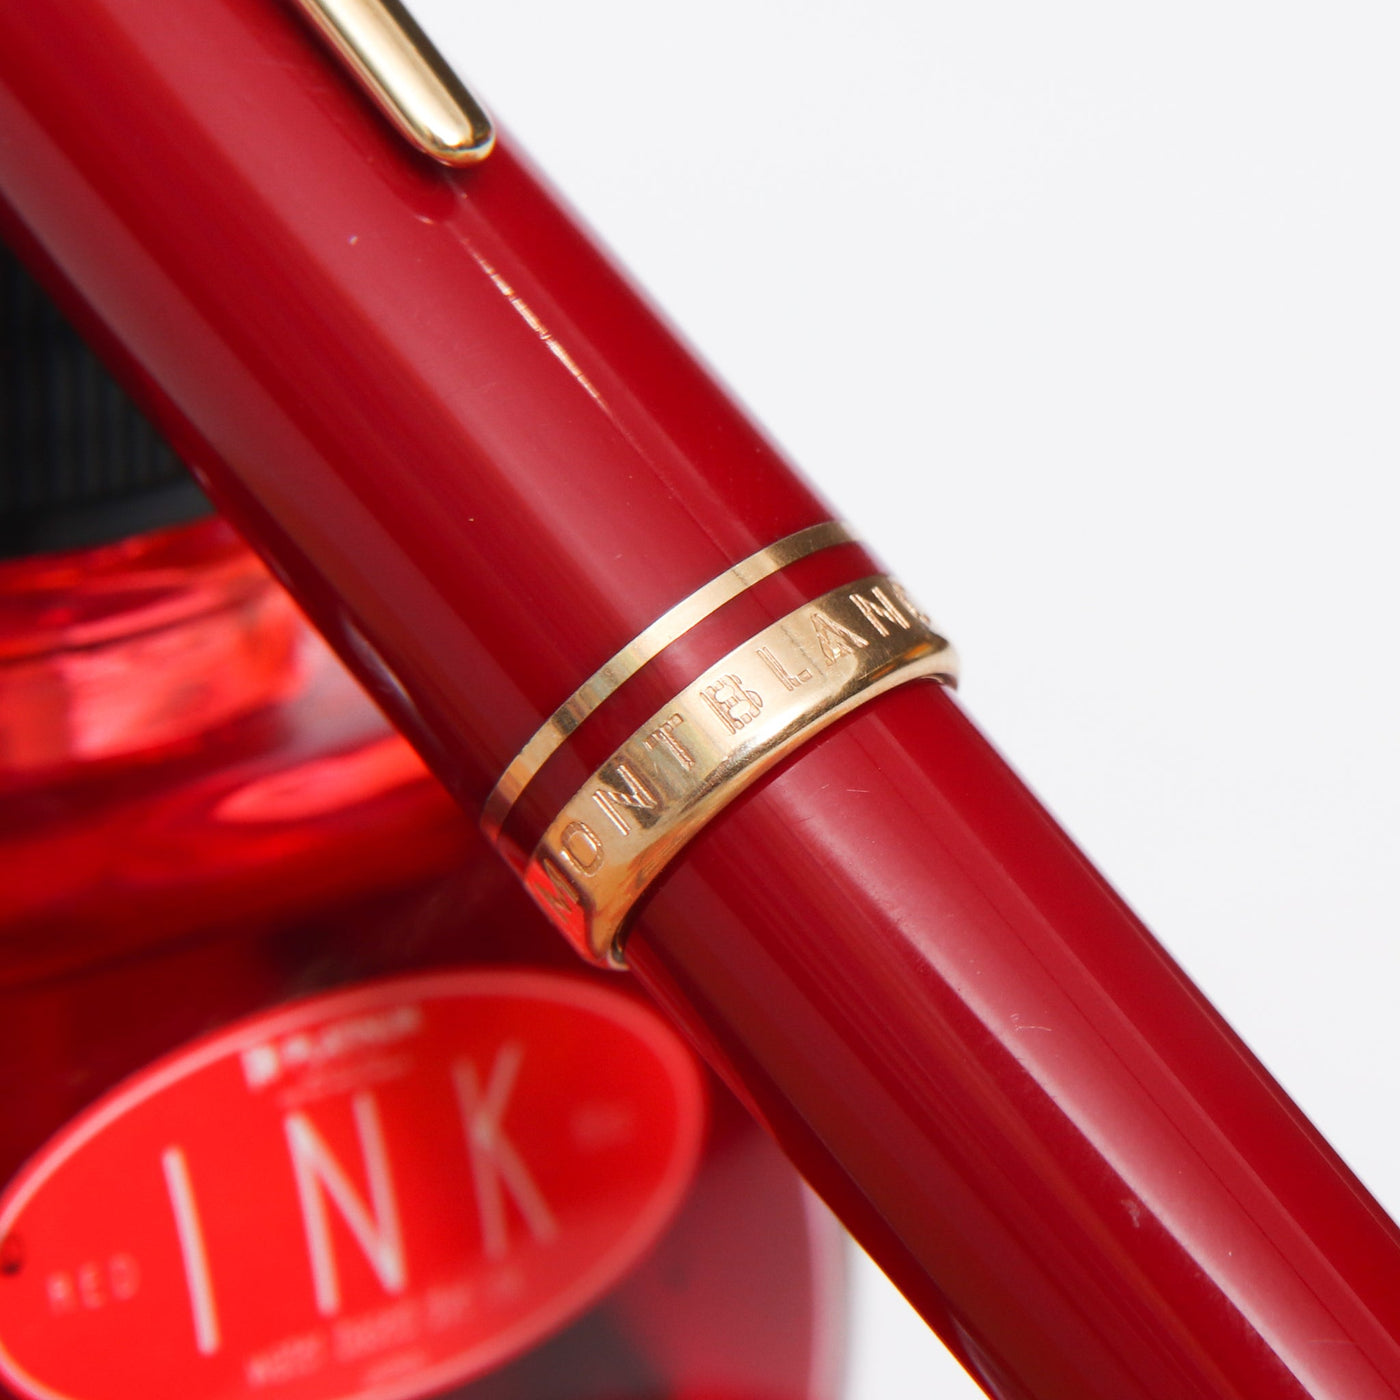 Montblanc Generation Bright Red & Gold Fountain Pen - Preowned Center Band